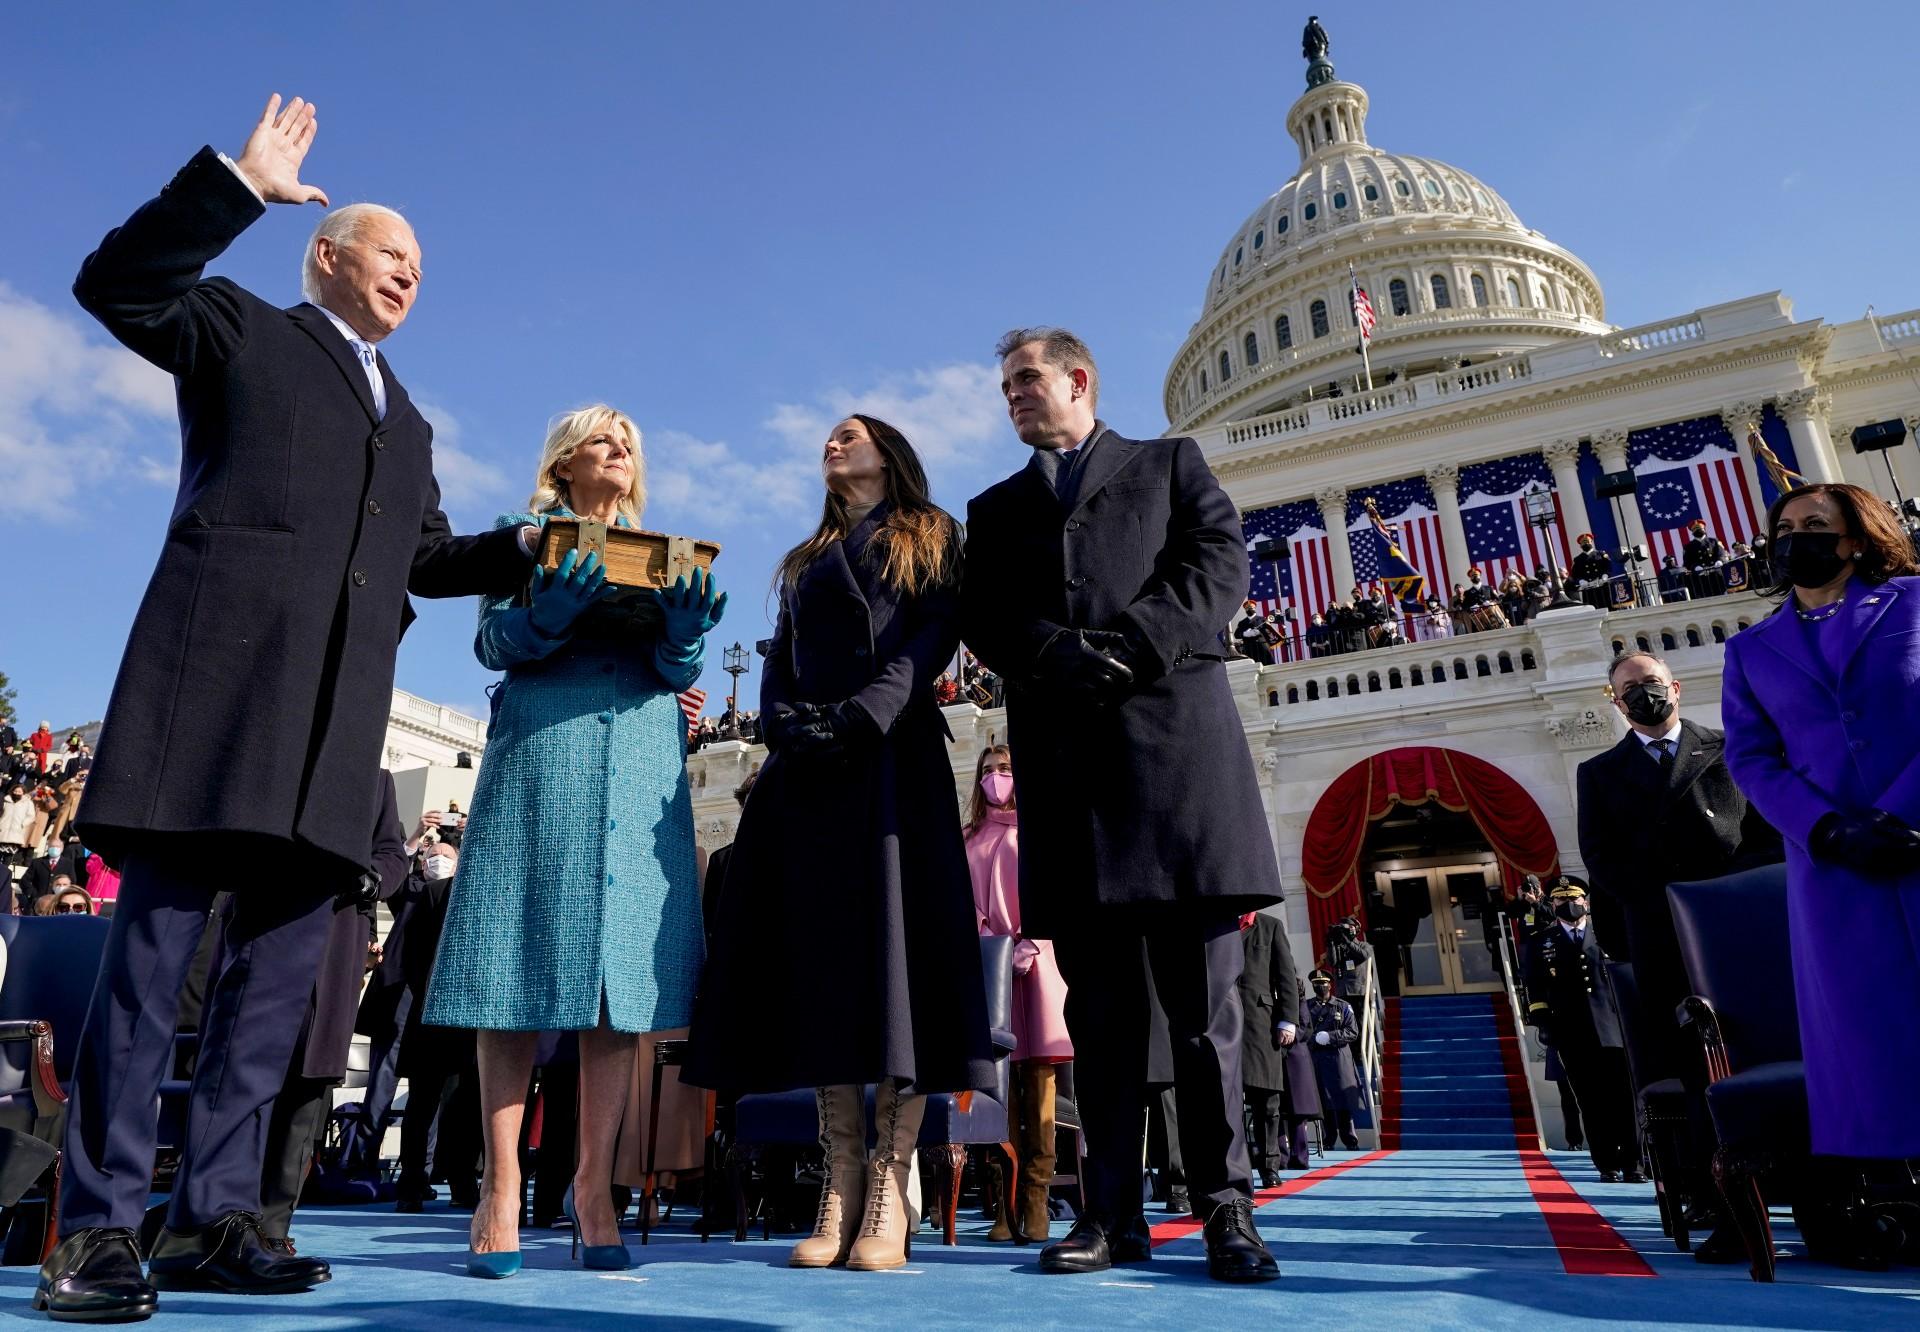 Joe Biden is sworn in as the 46th president of the United States by Chief Justice John Roberts as Jill Biden holds the Bible during the 59th Presidential Inauguration at the U.S. Capitol in Washington, Wednesday, Jan. 20, 2021, as their children Ashley and Hunter watch. (AP Photo / Andrew Harnik, Pool)